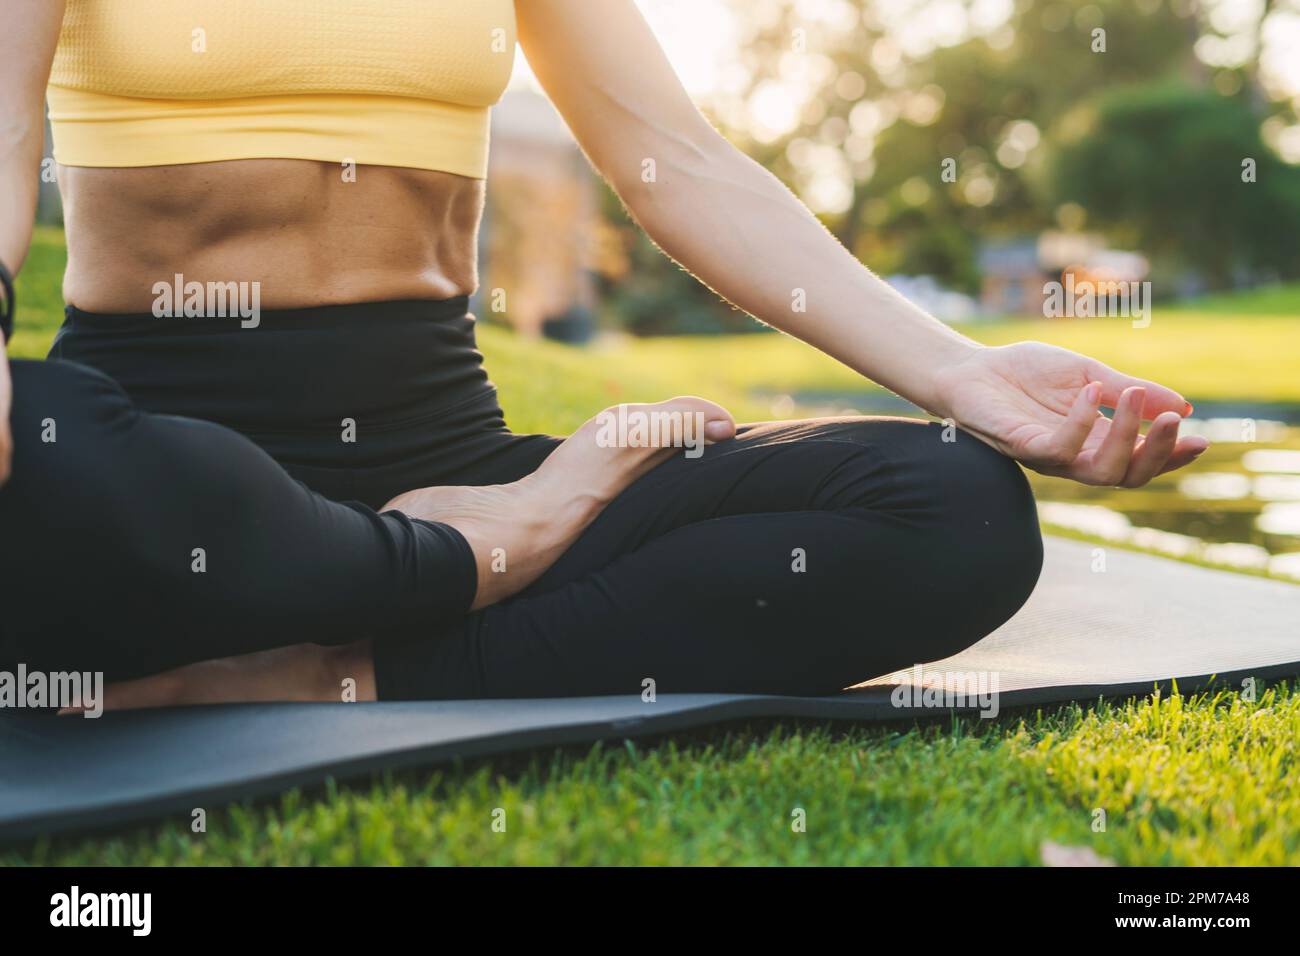 https://c8.alamy.com/comp/2PM7A48/close-up-of-a-woman-performing-yoga-postures-at-sunset-sitting-on-yoga-mat-in-the-morning-yoga-body-posture-training-workout-fitness-woman-2PM7A48.jpg